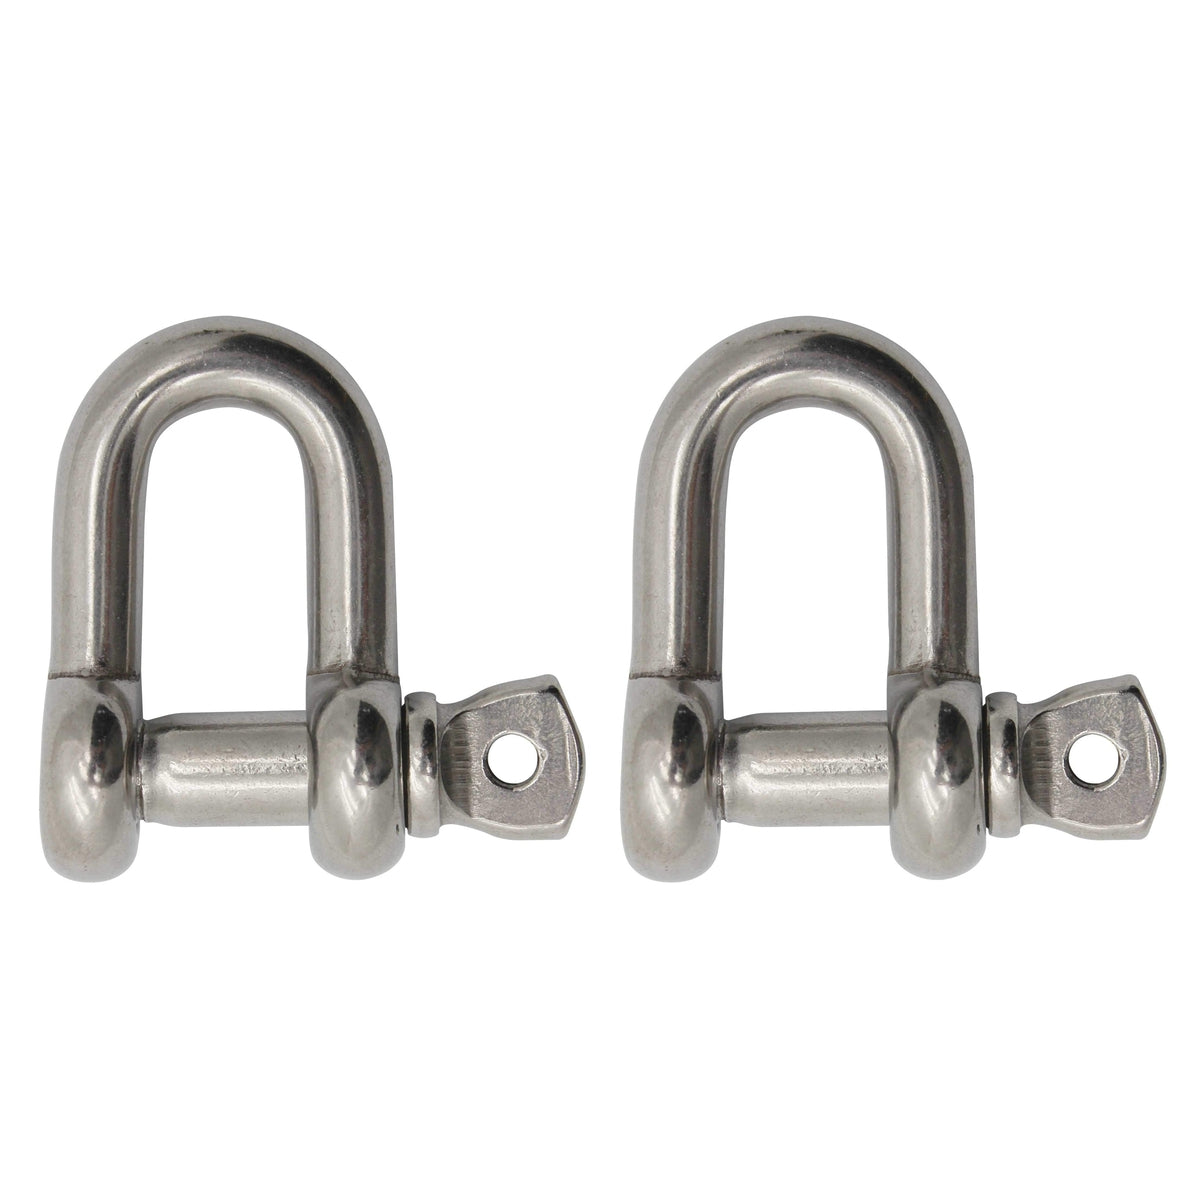 Extreme Max BoatTector SS Chain Shackle 7/16" 2-pk #3006.8269.2